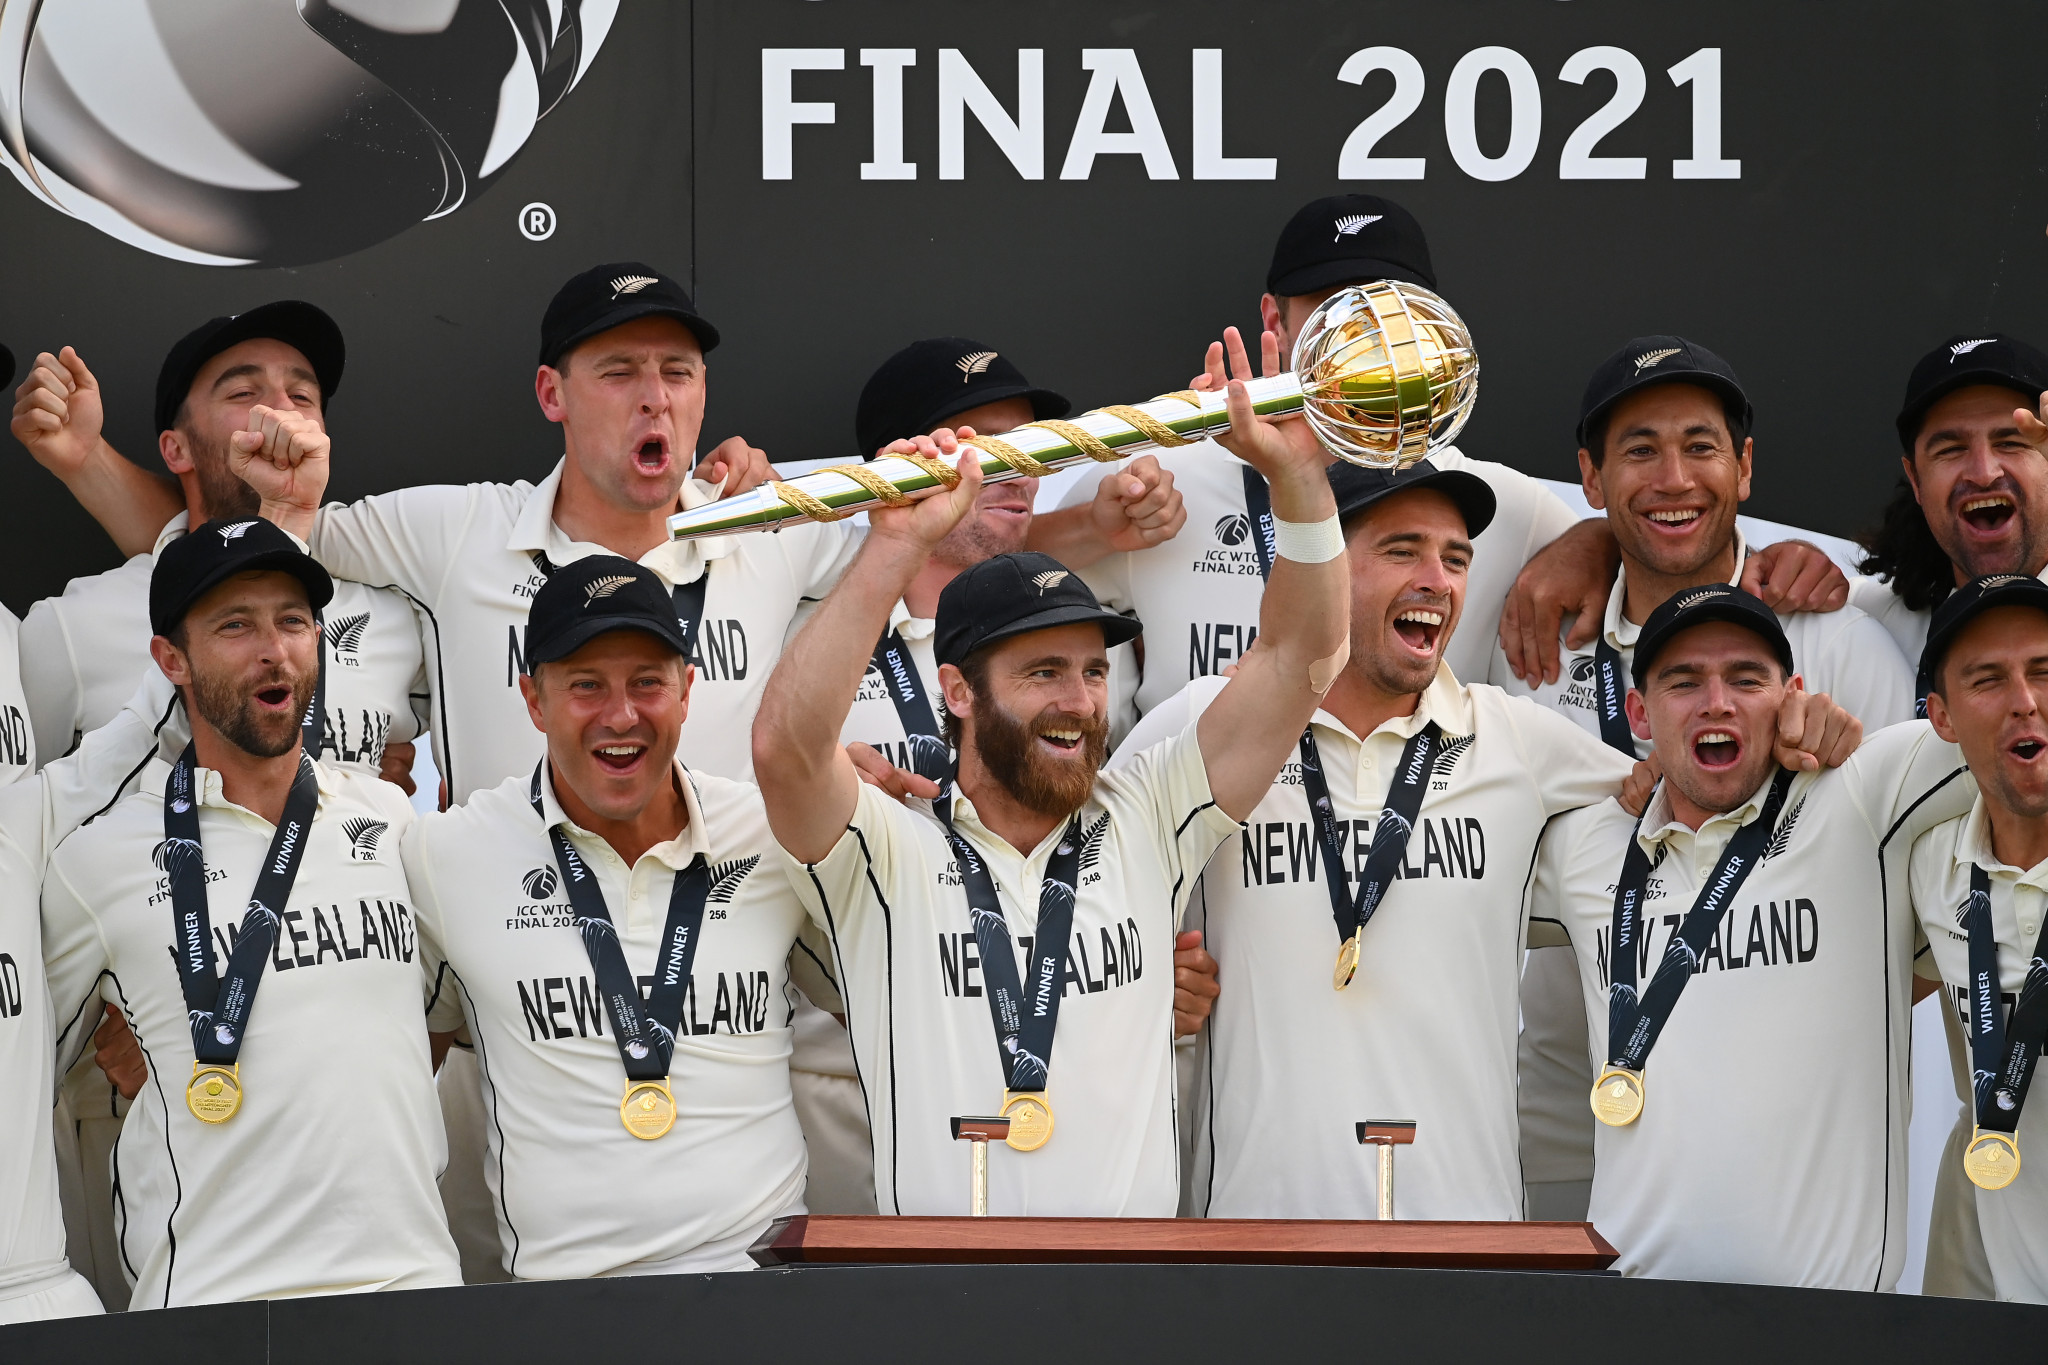 ICC announces details of prize money for "the ultimate Test"